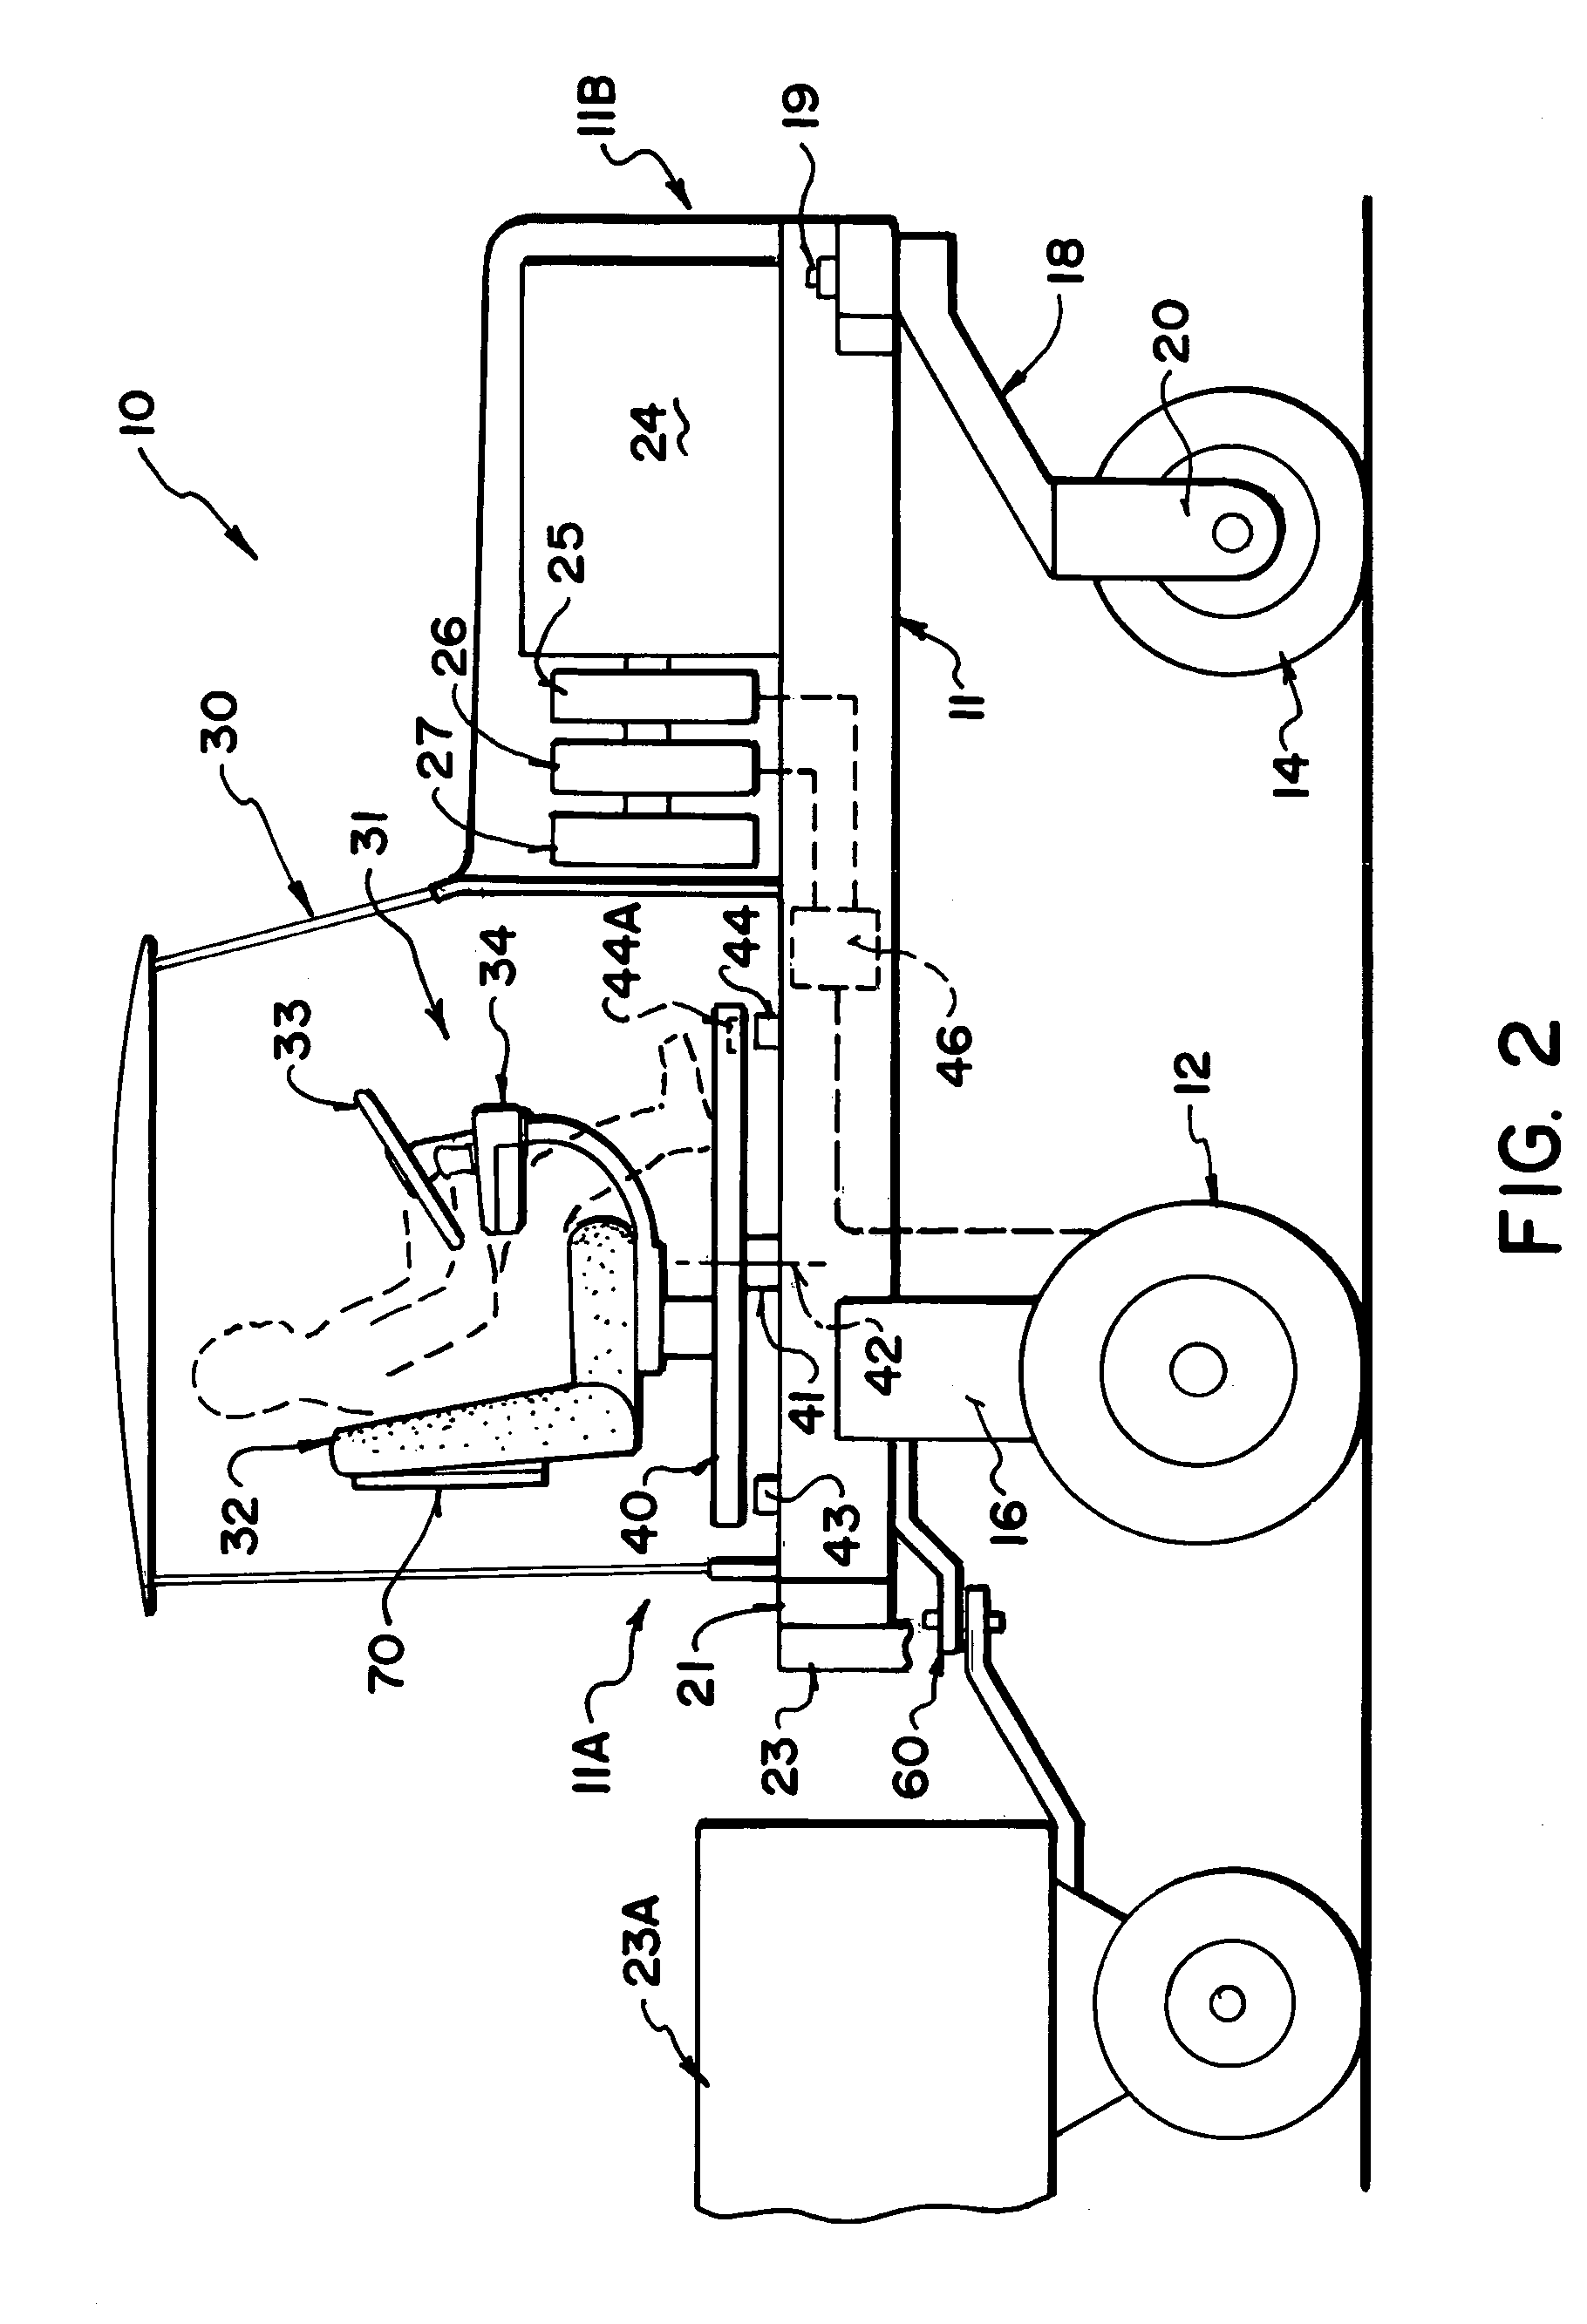 Tractor with hydraulic speed and steering control for steering at maximum speed